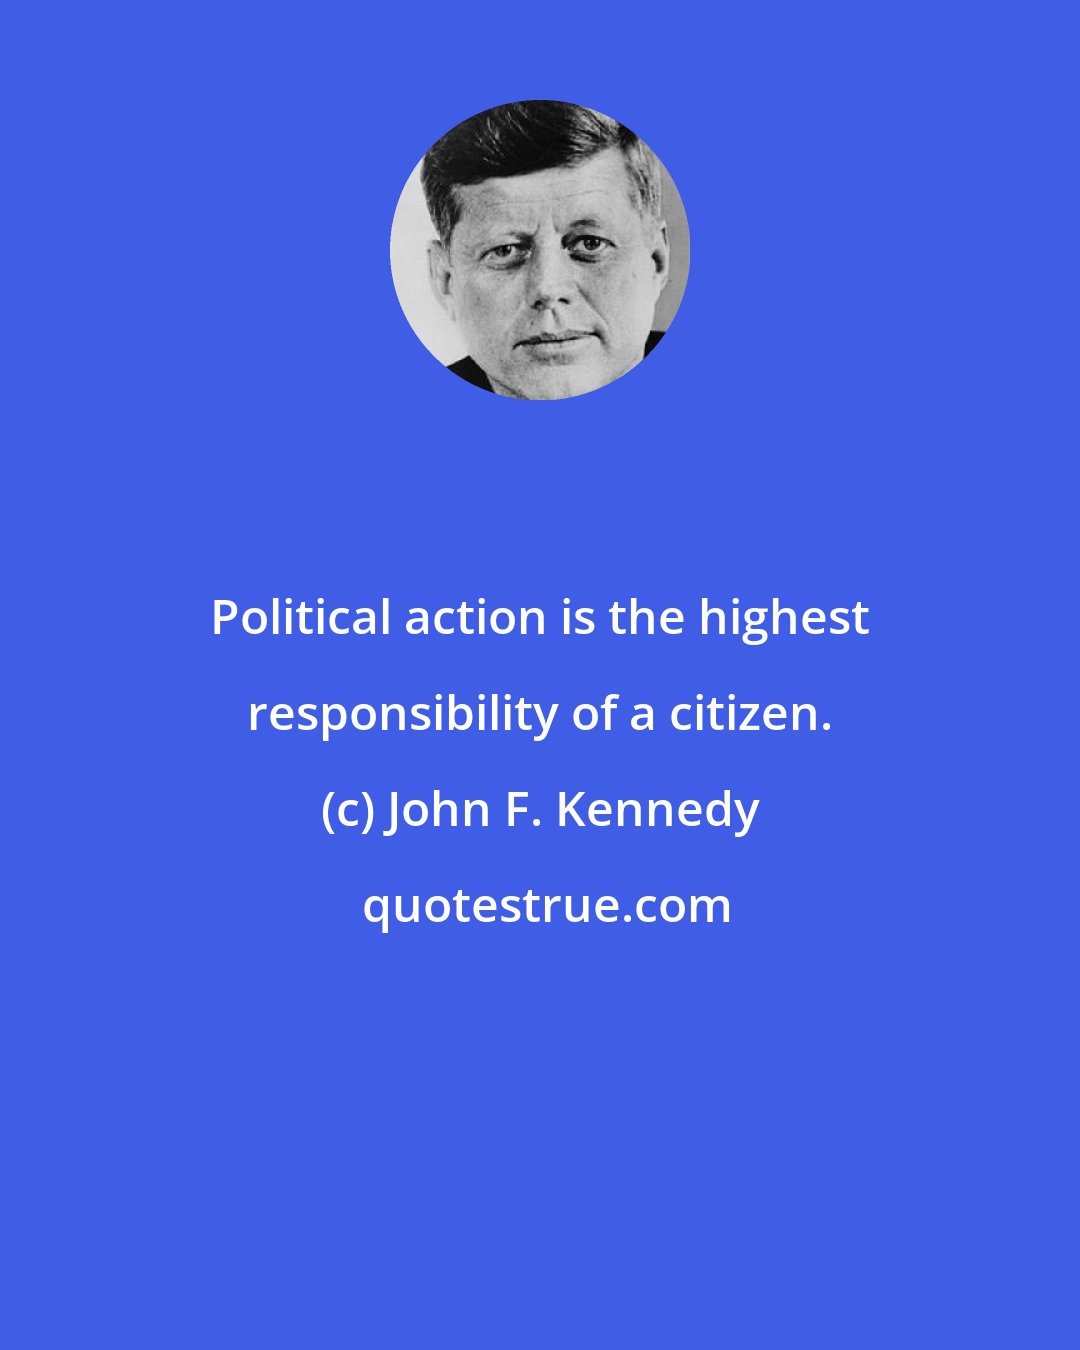 John F. Kennedy: Political action is the highest responsibility of a citizen.